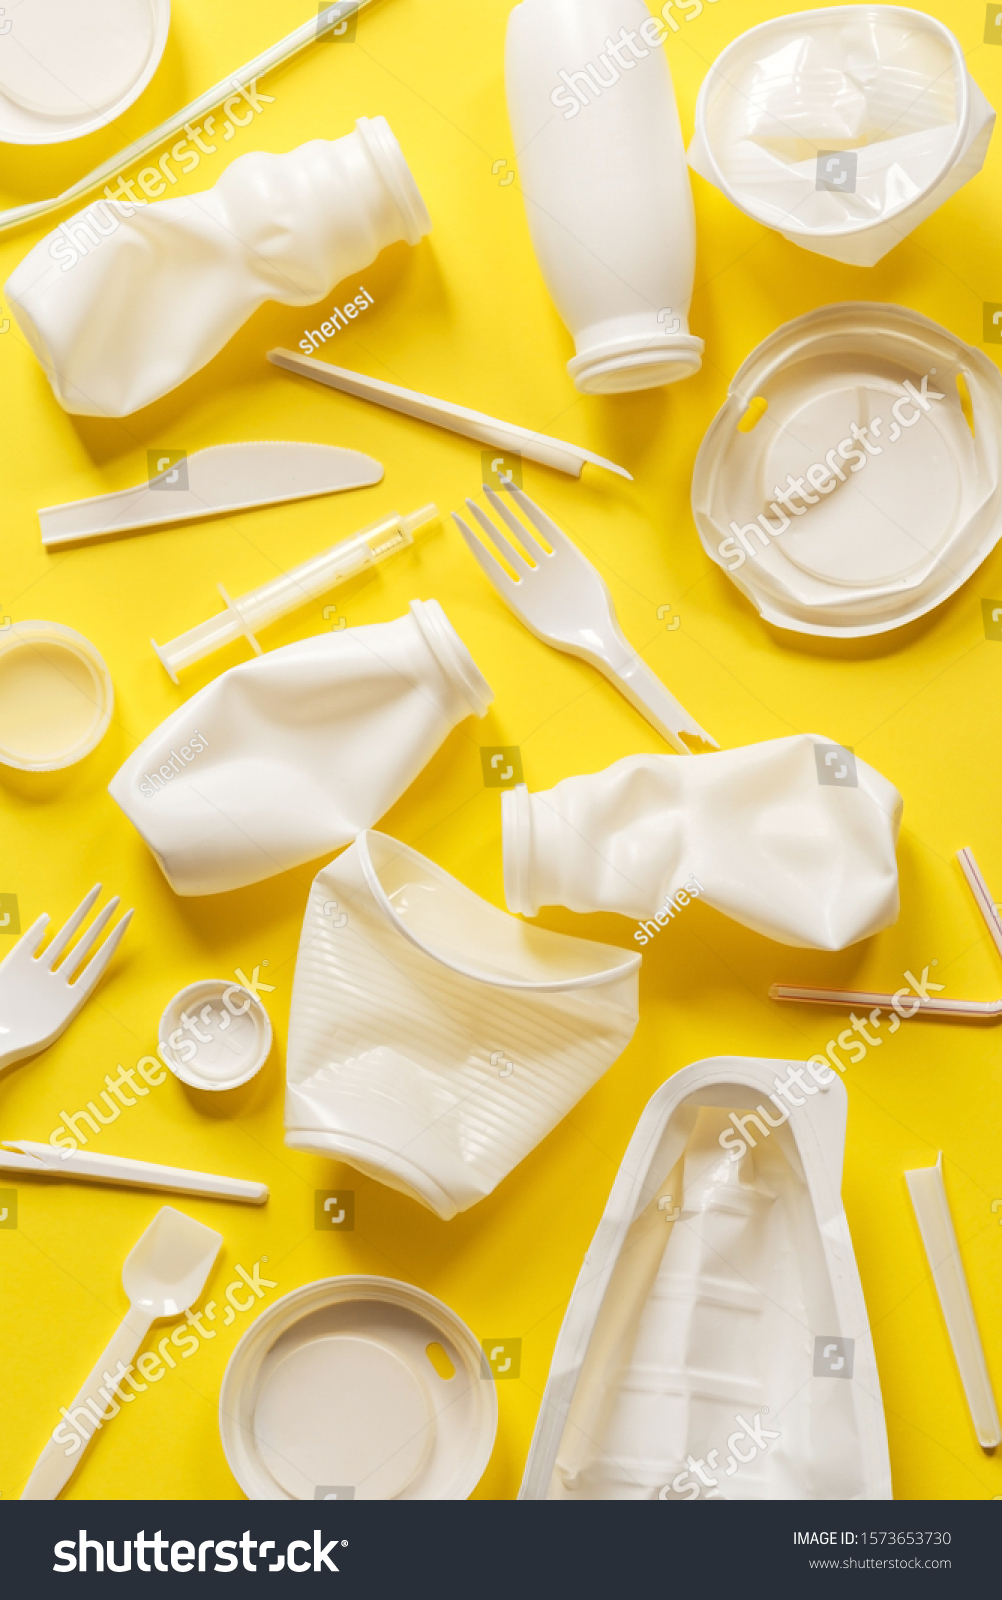 Used white plastic packaging for food on a yellow background. The concept of protecting the environment from plastic waste contamination. Flat lay #1573653730